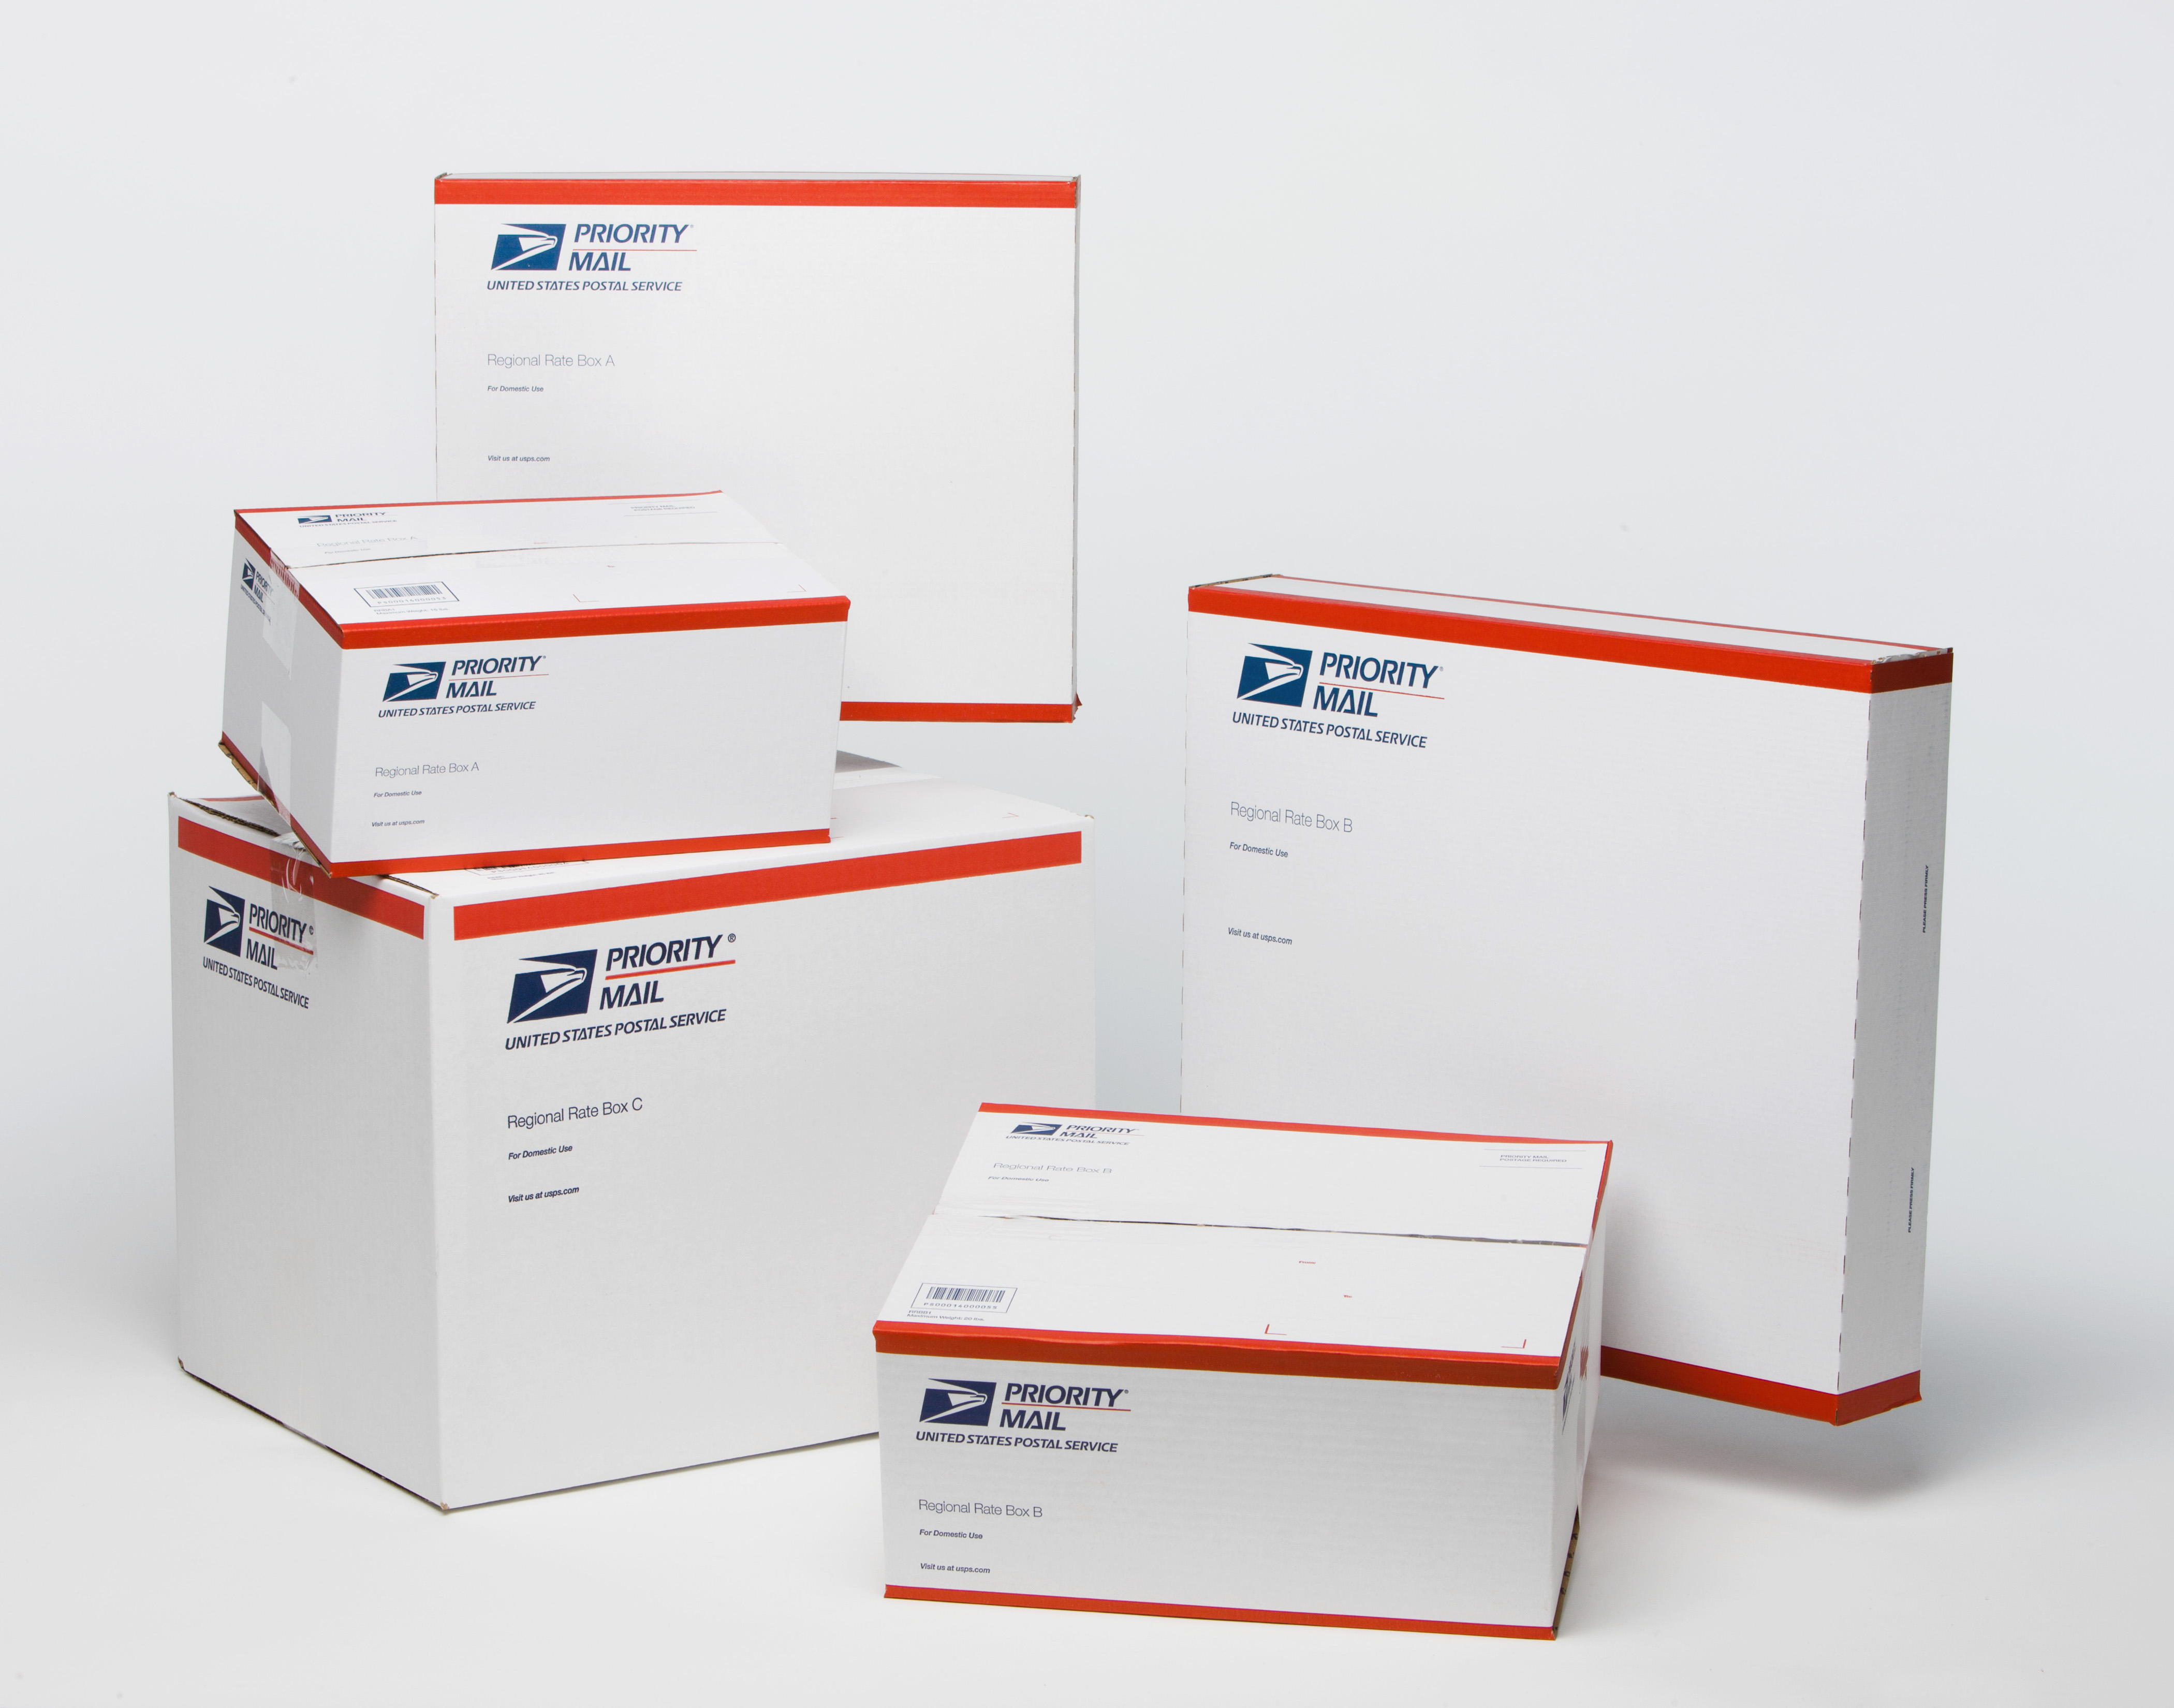 T me usps boxing. USPS Postal service. Size USPS package Box. United States Postal service Box. Priority mail Box.